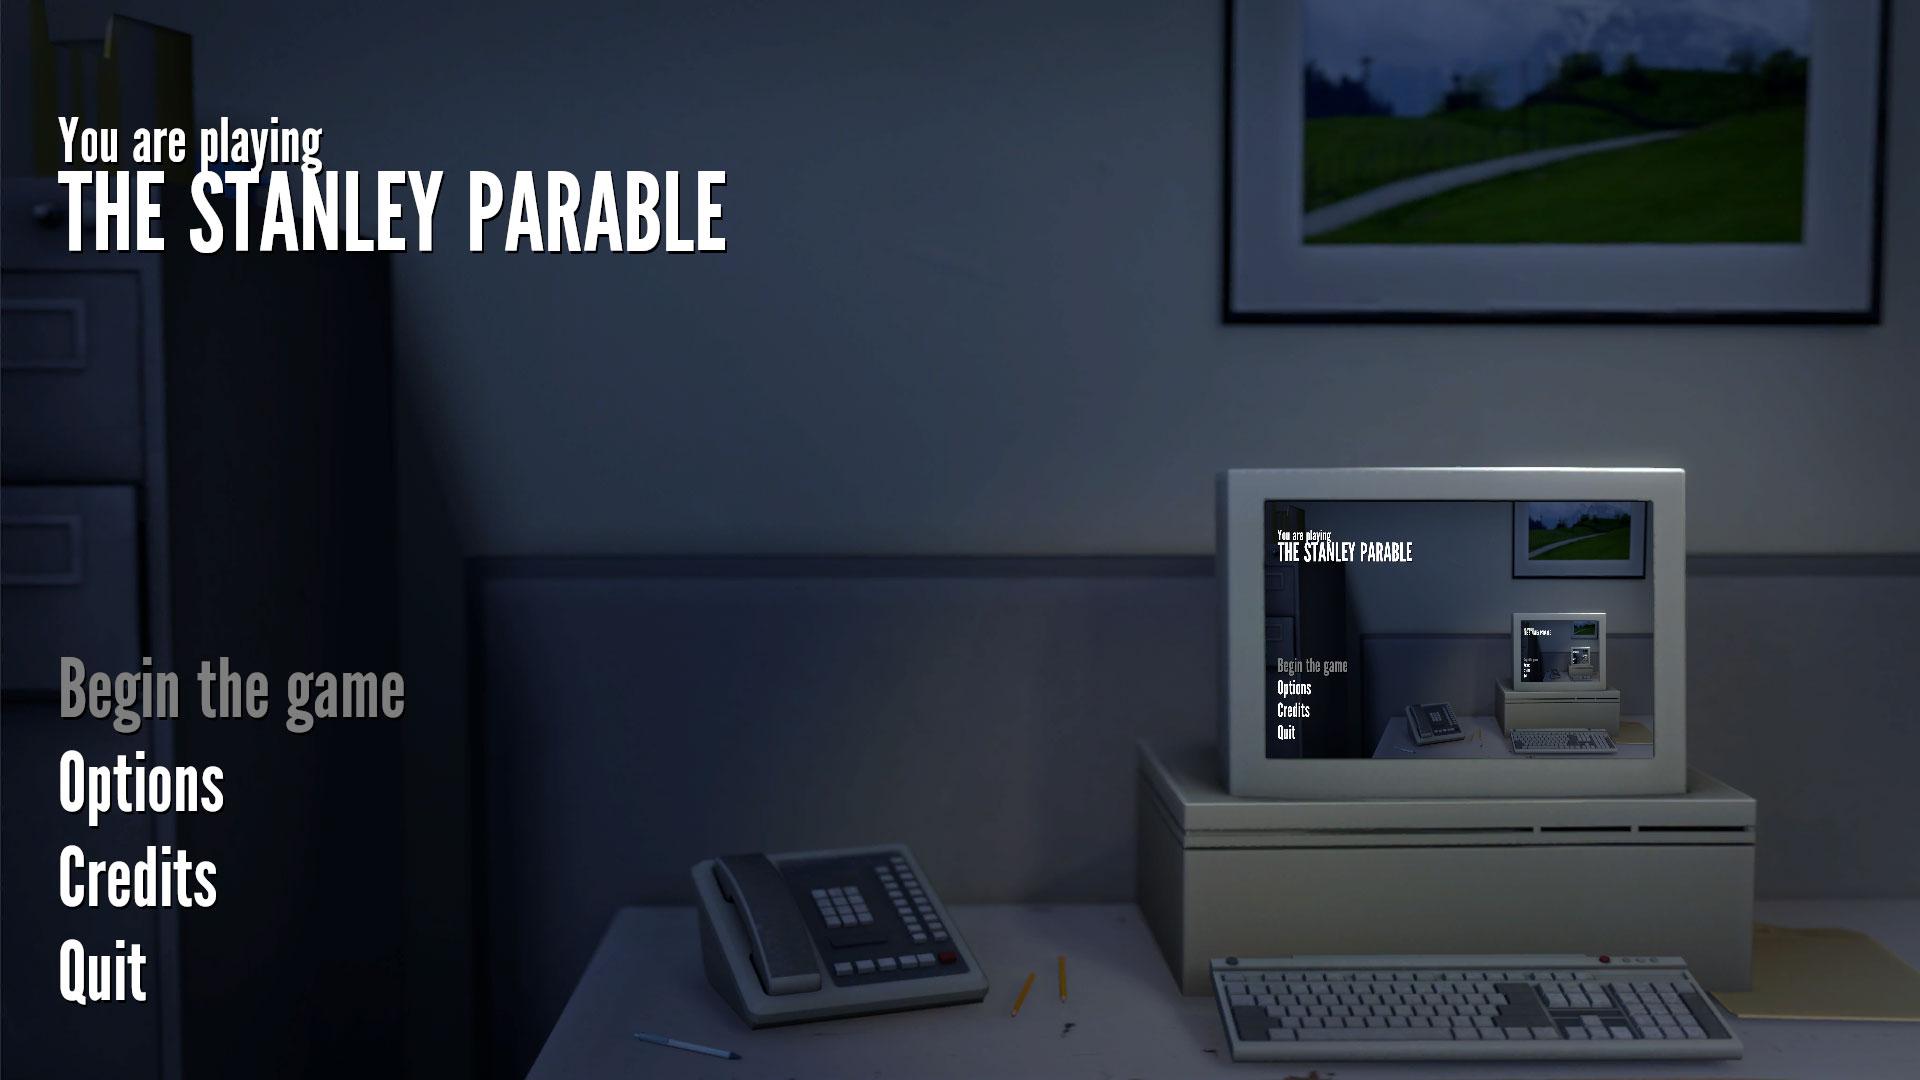 TheStanleyParable